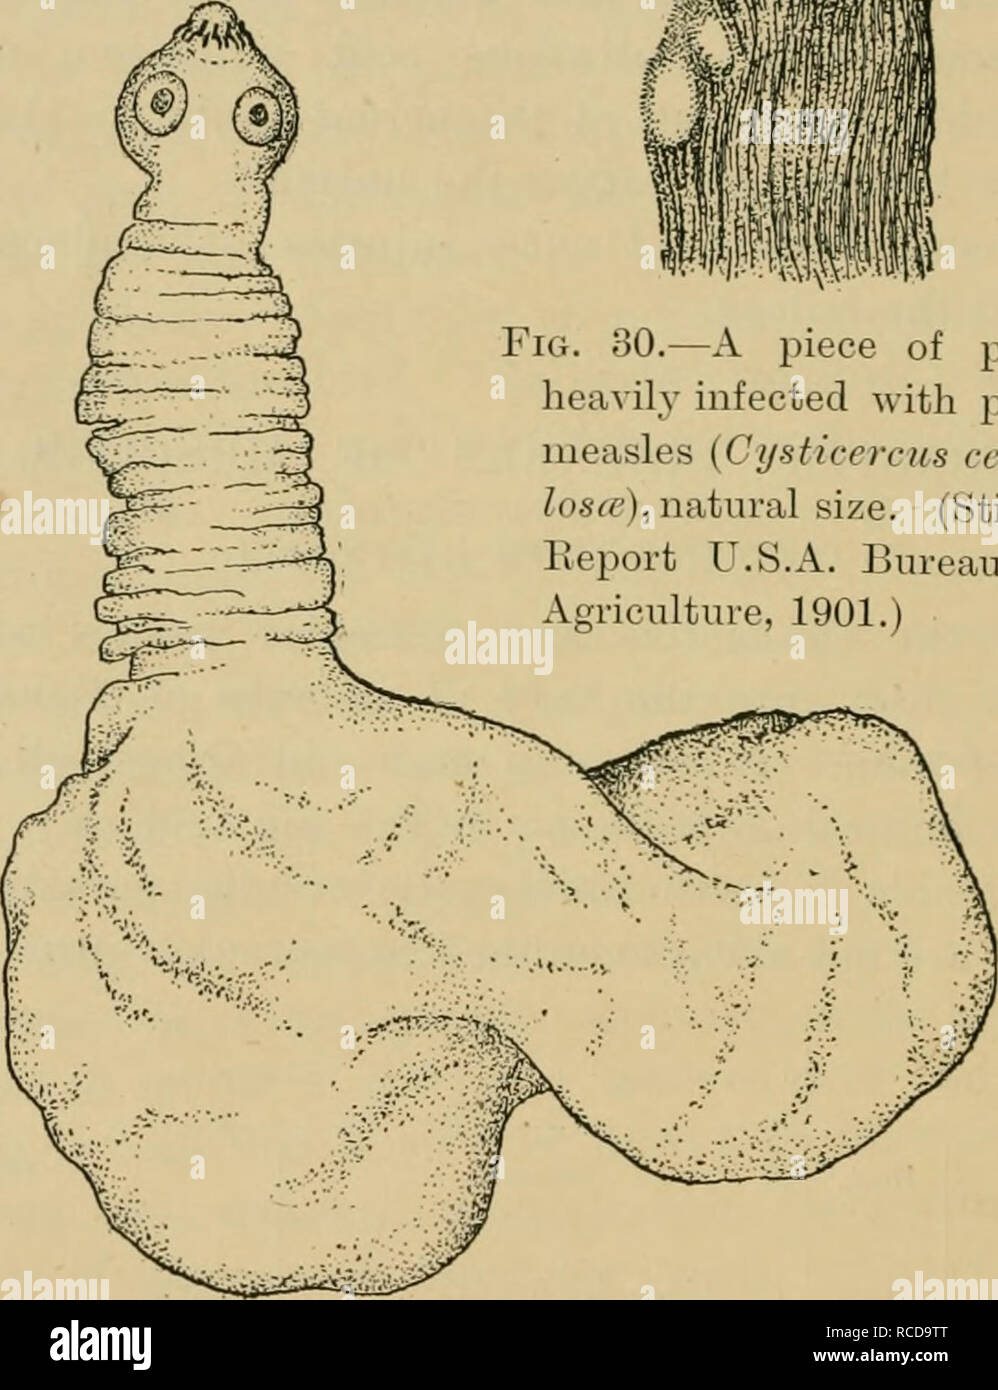 . Diseases of cattle, sheep, goats and swine. Veterinary medicine. ric )0— piece ot poik heiMh infected with, poik me isles {Cysticncus idUi losa) wxiwixX ^i/e. (Stiles Kepoit L S  Buiciu of Voucnltuic 1901 ). Fig. 31.—An isolated pork-measle bladder woiiu (Ci/sticcrcus ceUulos(c), with extended head, greatly enlarged. (Stiles, Report U.S.A. Bureau of Agriculture, 1901.) Causation. The cause of cysticercus disease in the pig ma}' be summed up in one phrase—viz., ingestion of eggs or eml)ryos of T&lt;enia soUnm. Young animals alone seem to contract the disease.. After the age of eight to ten  Stock Photo